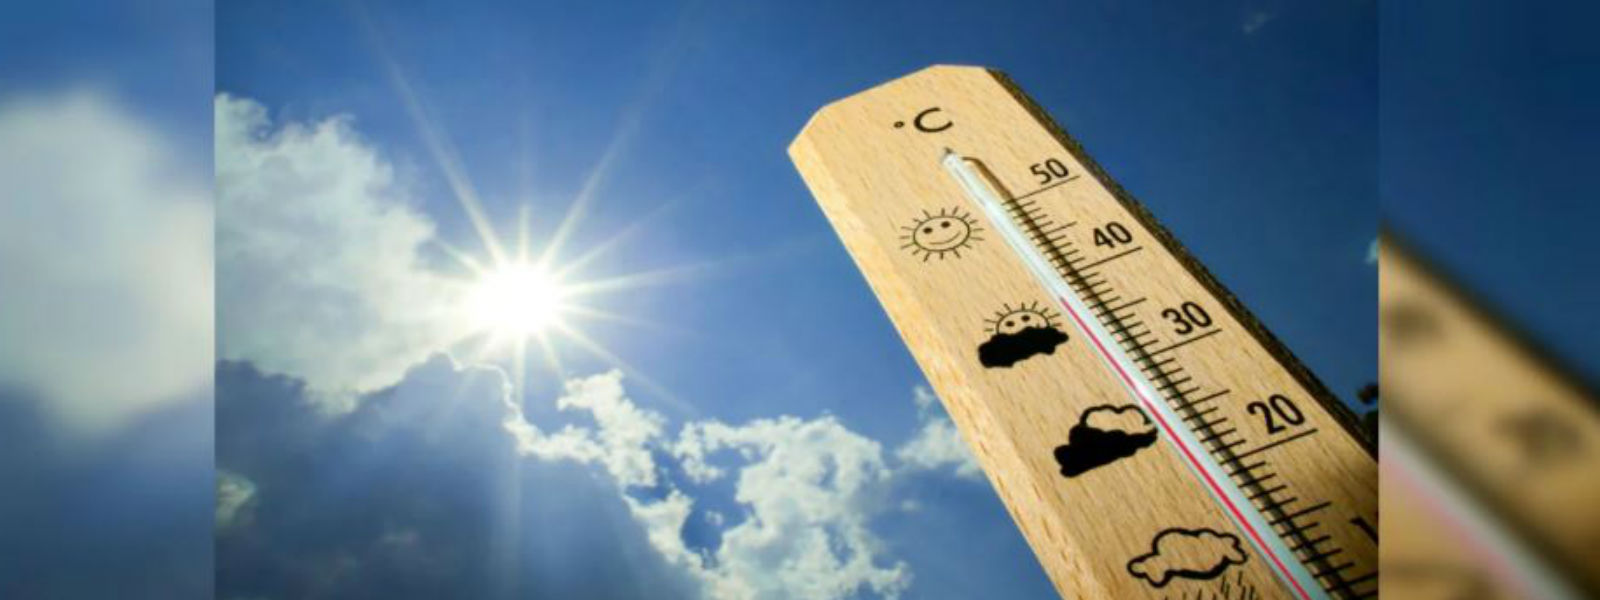 SL experiencing highest temperature in 140 years